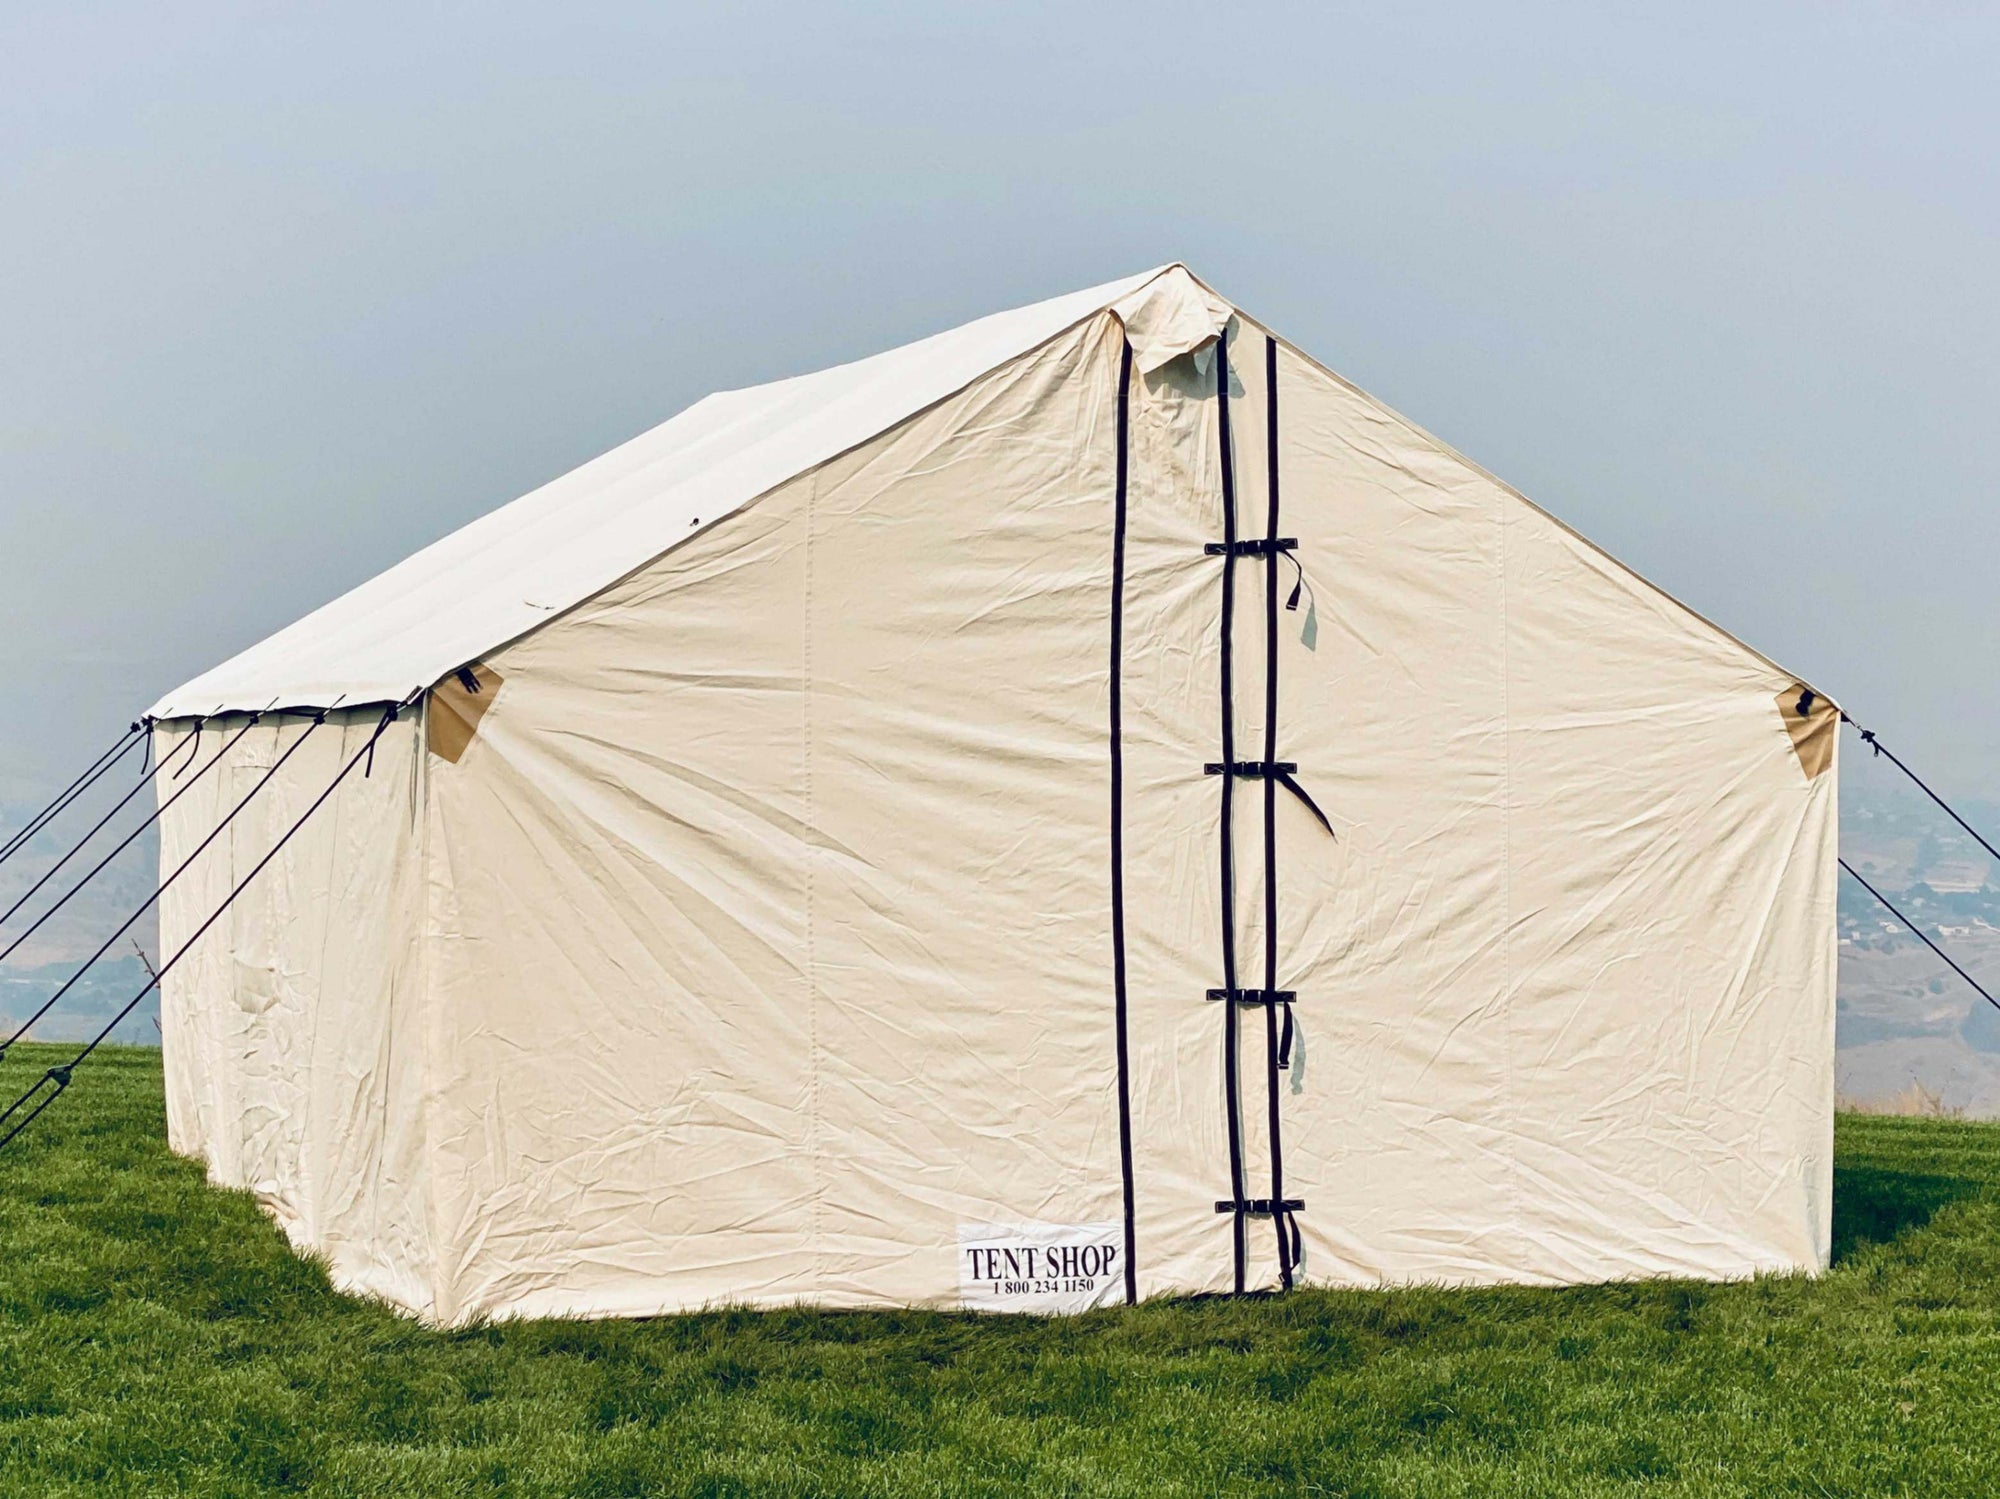 Wilderness Wall Tent Shop Canvas Tent For Sale with Angle Kit to make frame